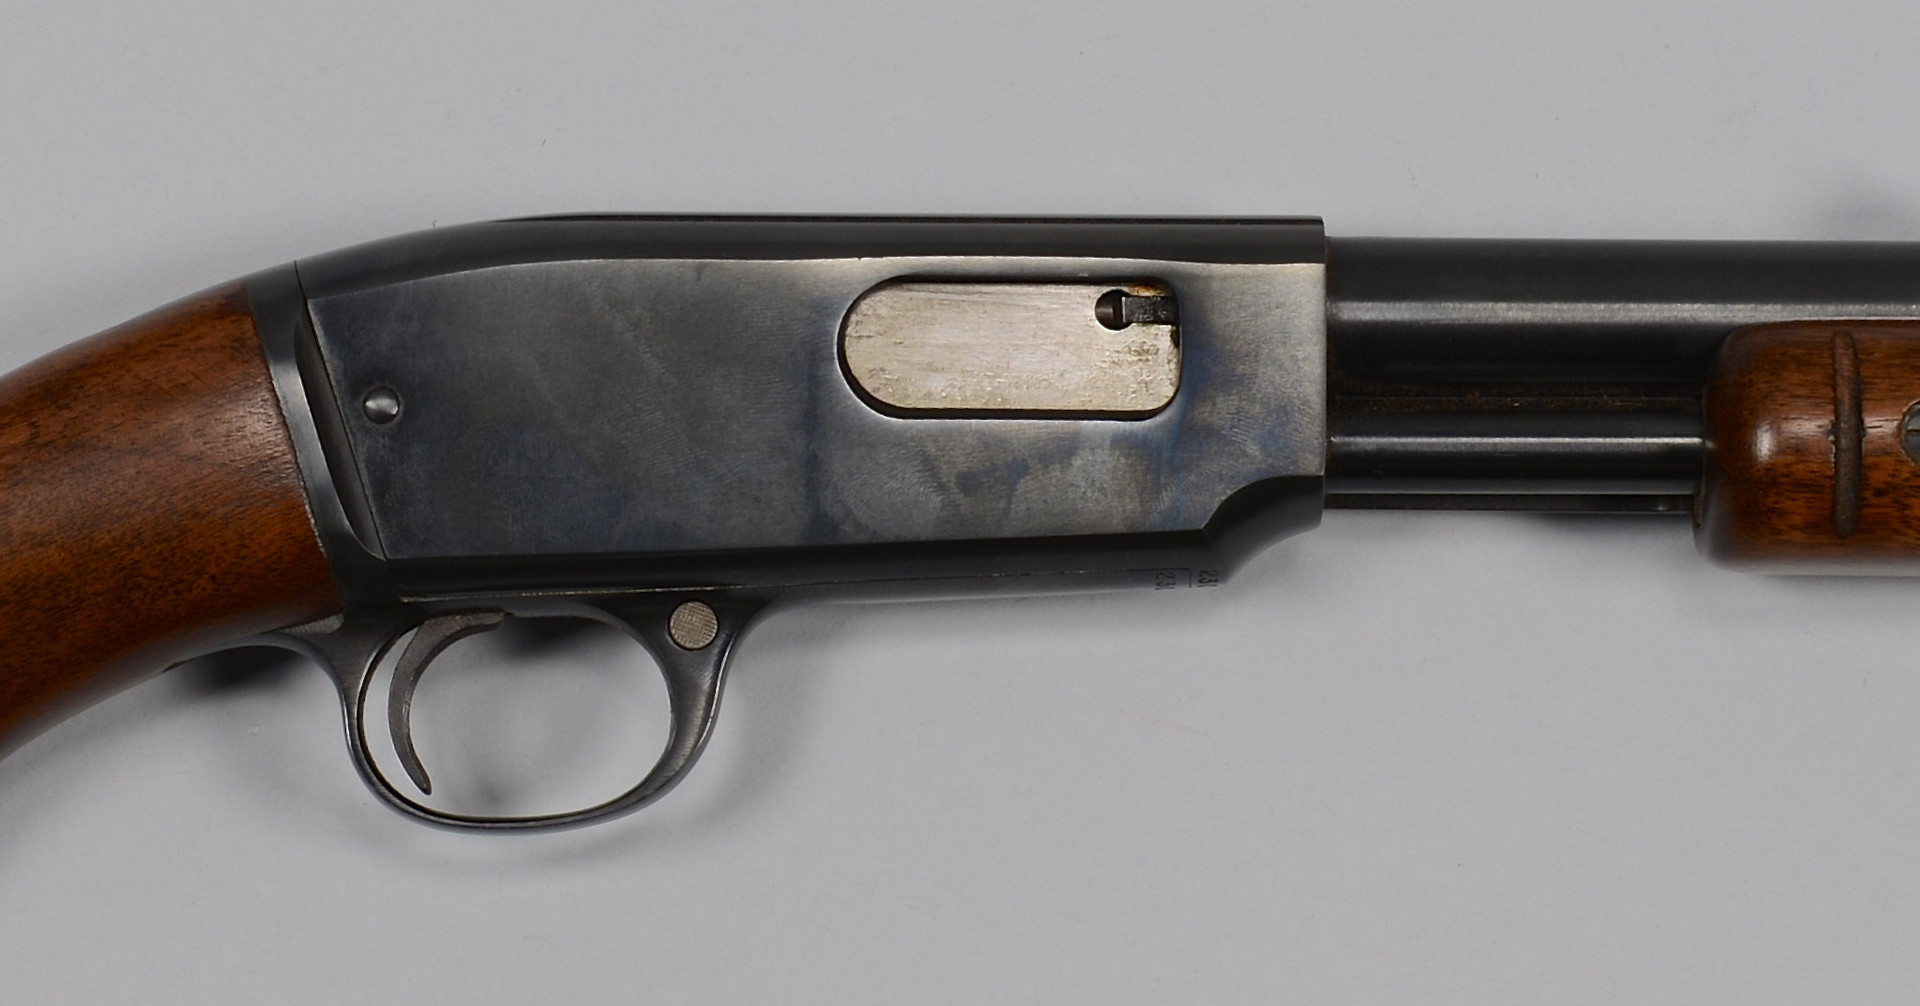 Lot 718: Winchester Model 61 Pump Action Rifle